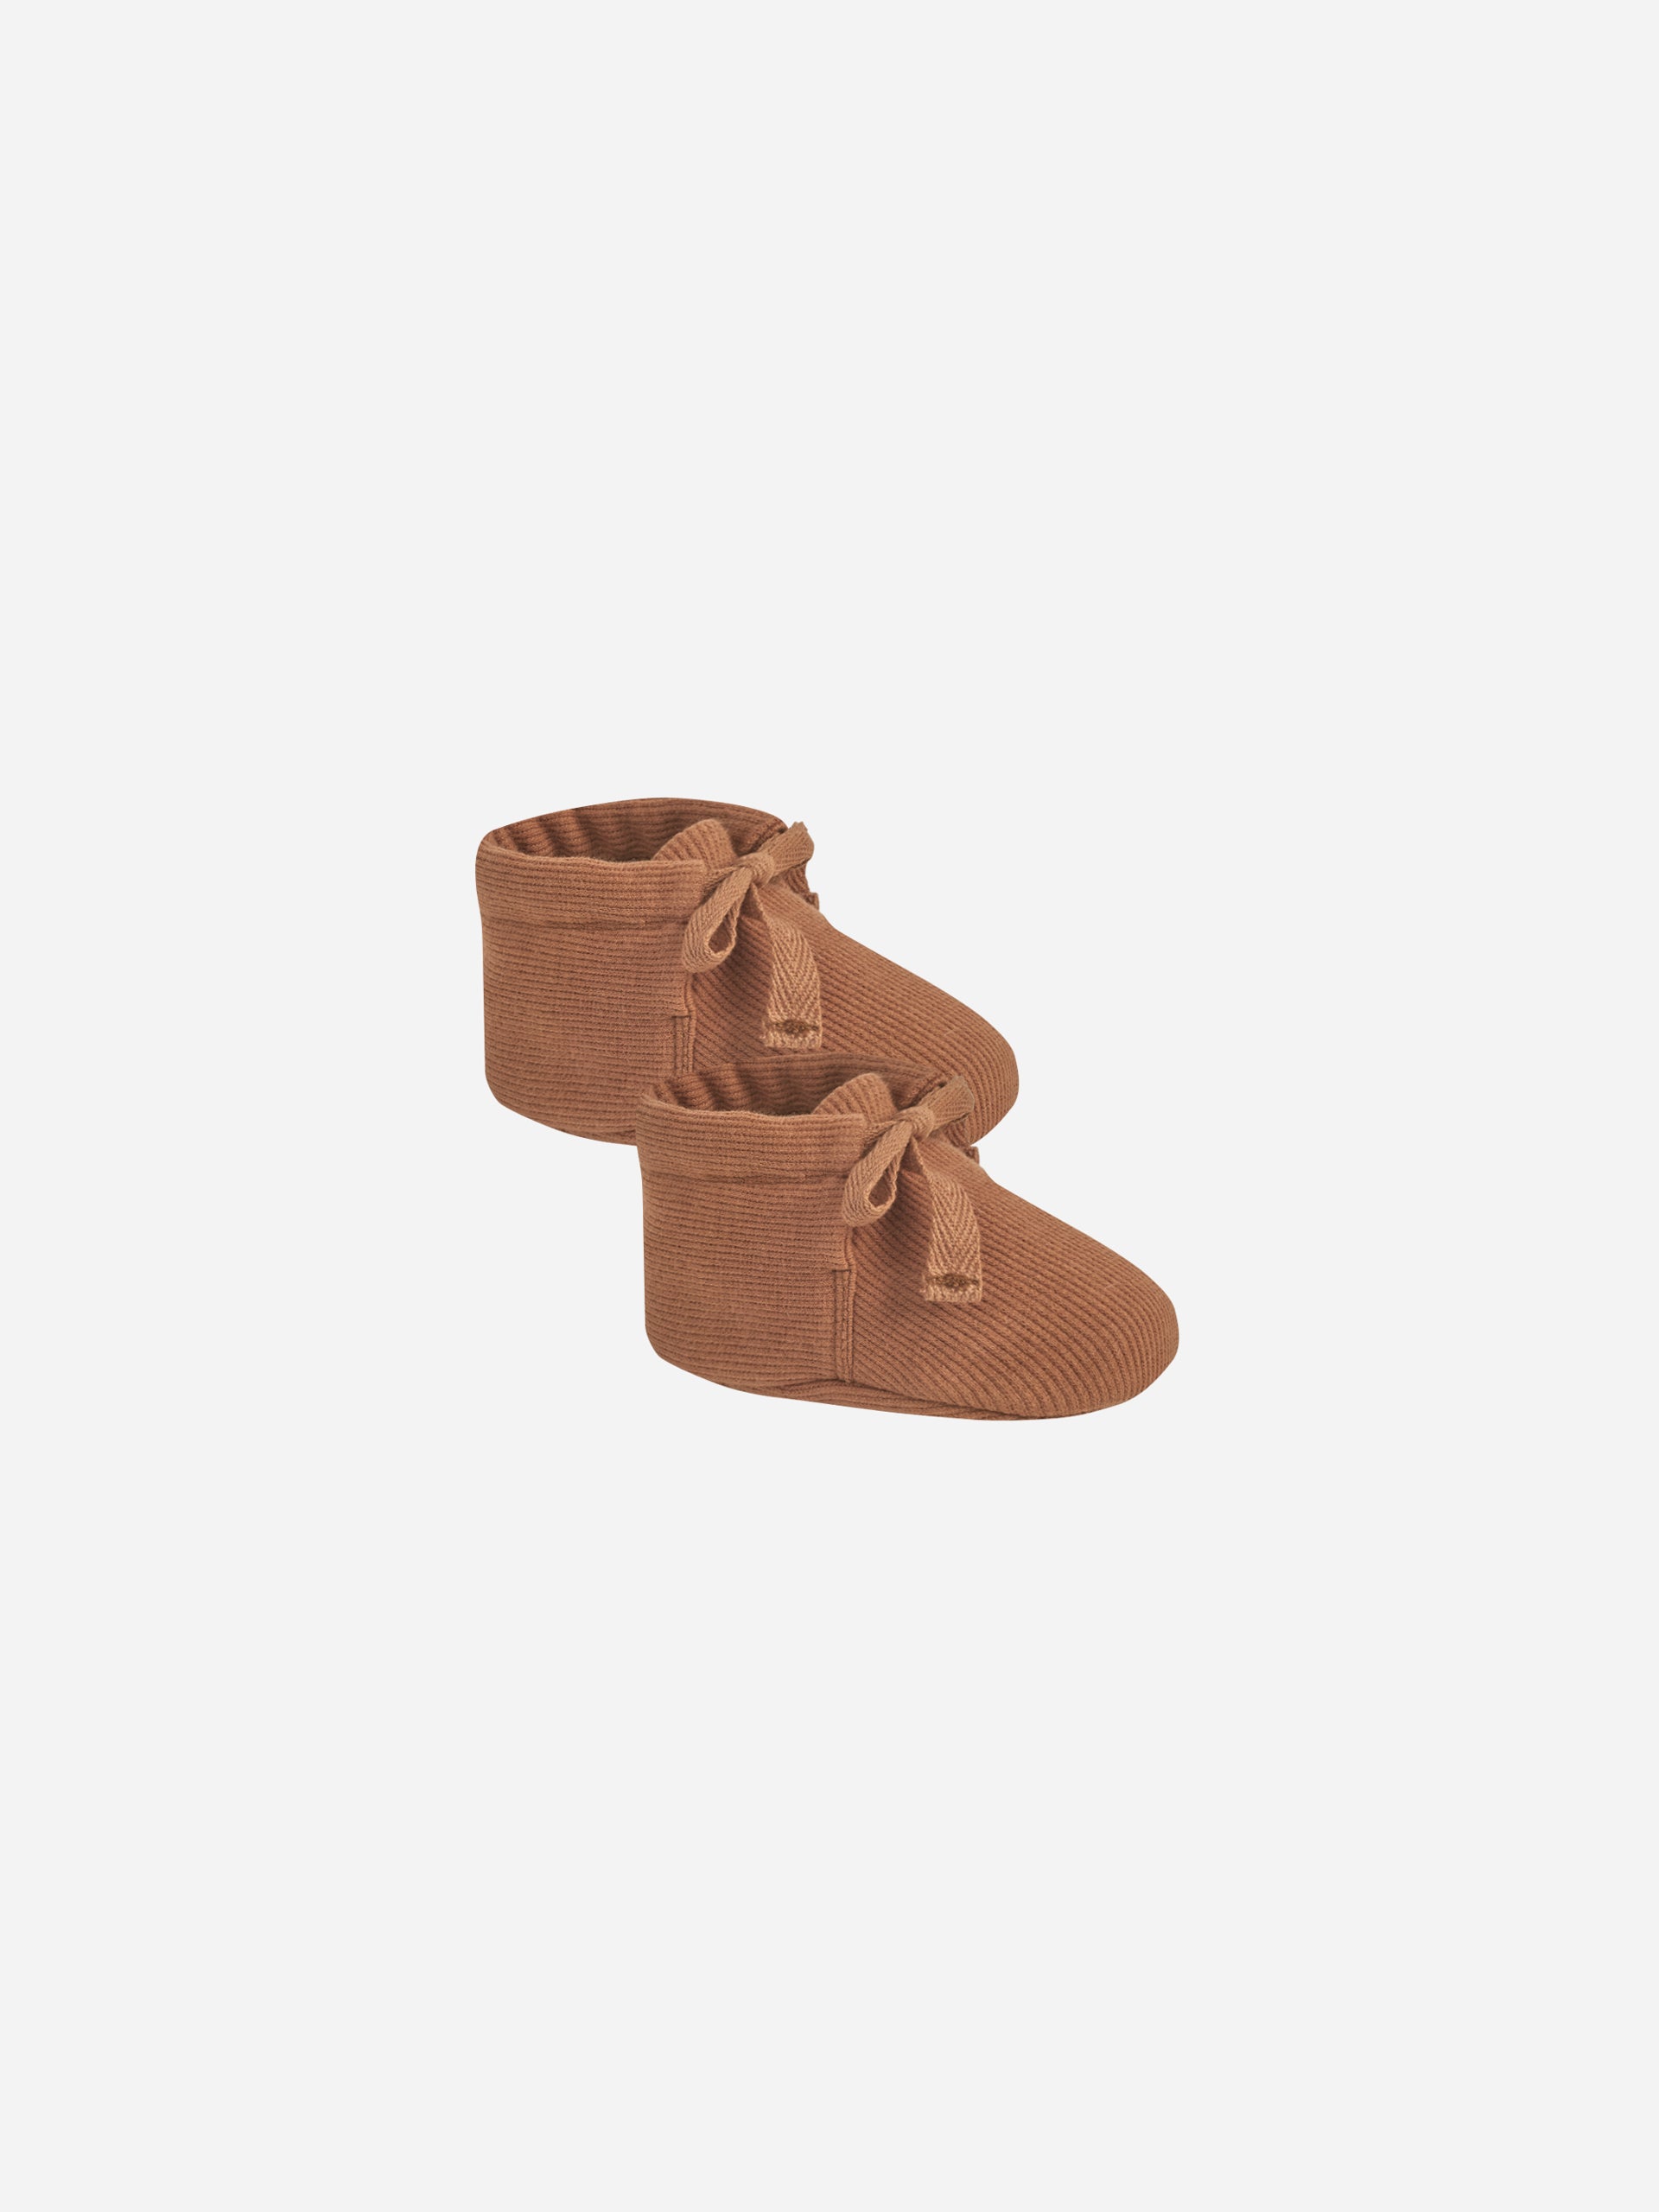 Ribbed Baby Booties || Clay - Rylee + Cru | Kids Clothes | Trendy Baby Clothes | Modern Infant Outfits |